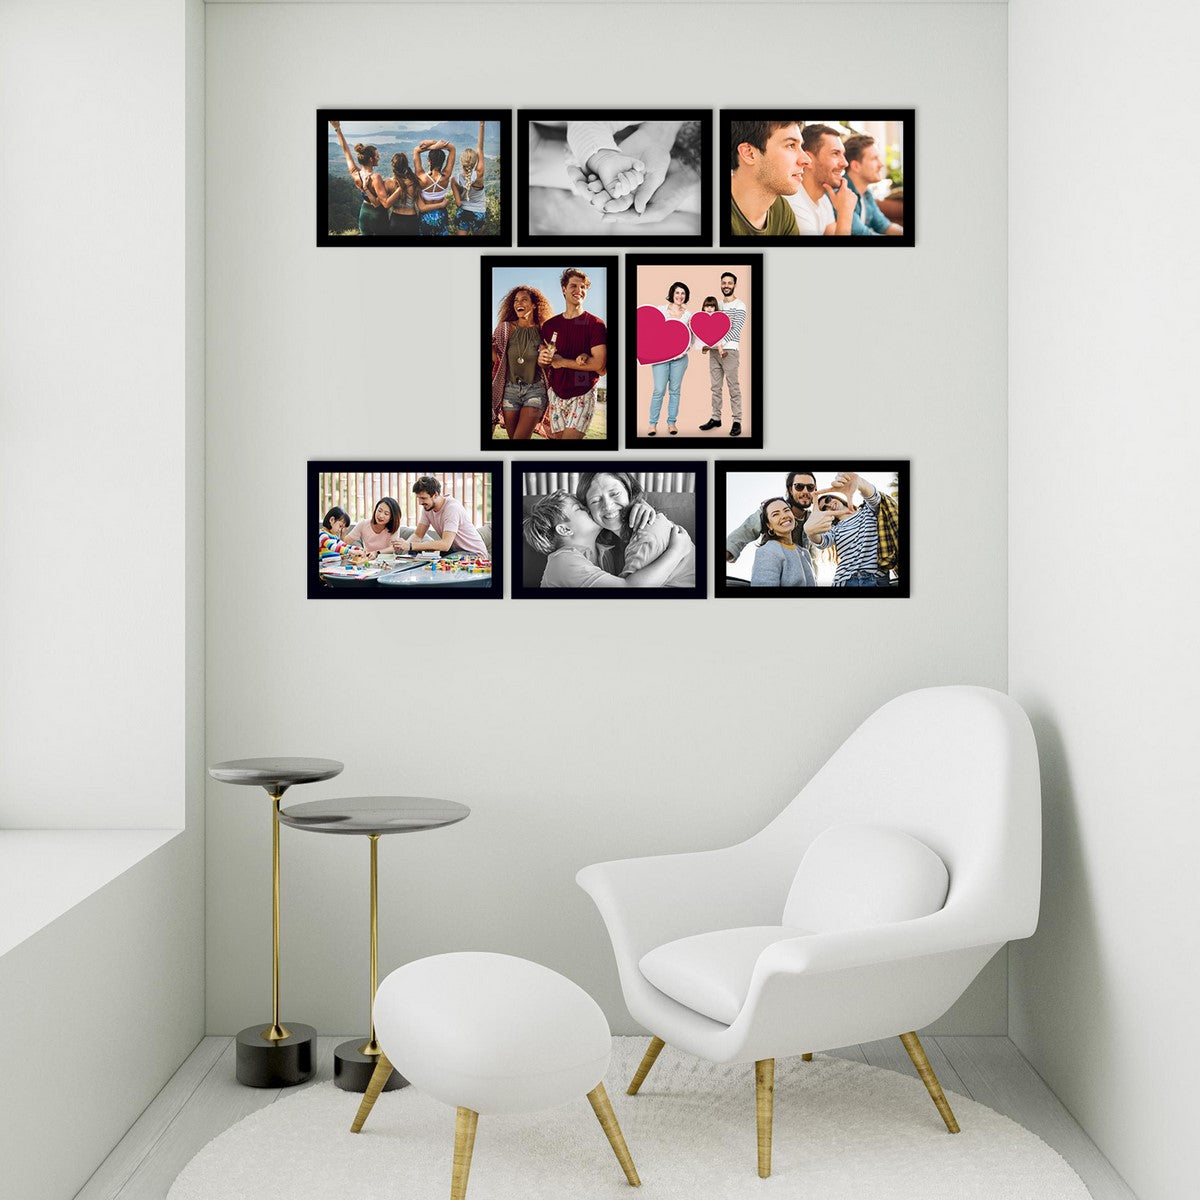 Memory Wall Collage Photo Frame - Set of 8 Photo Frames for 8 Photos of 5"x7" 2